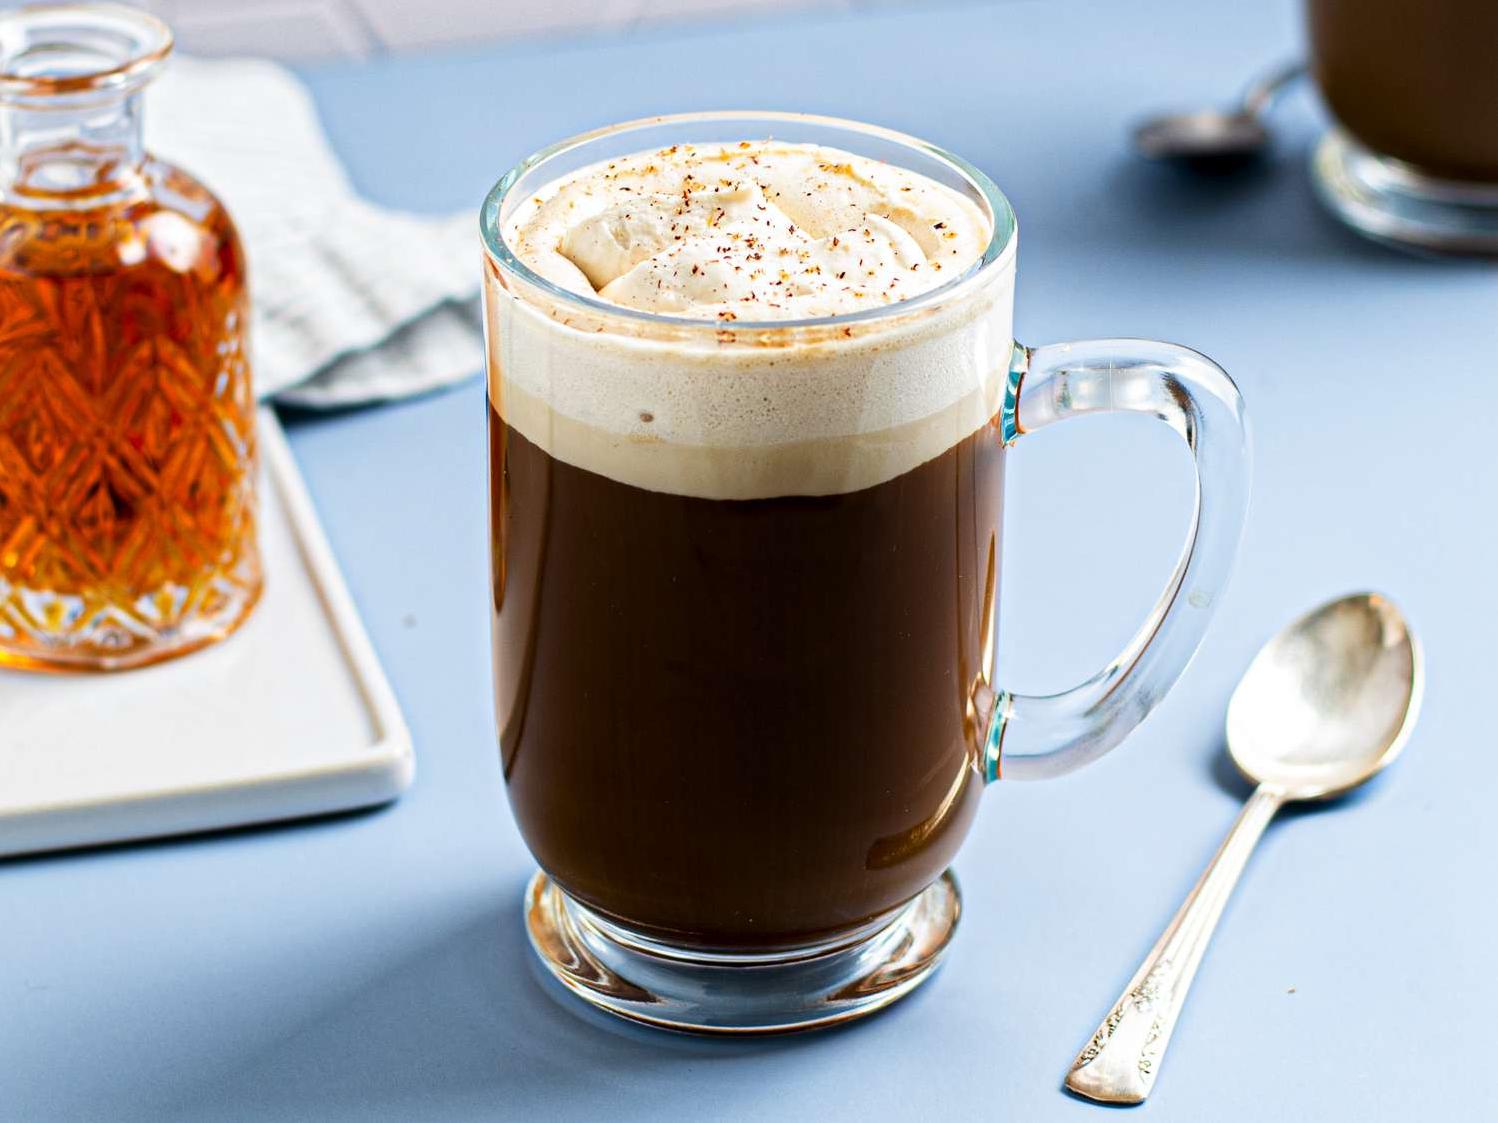  This spiced cream coffee is sure to give you a boost and warm you up!